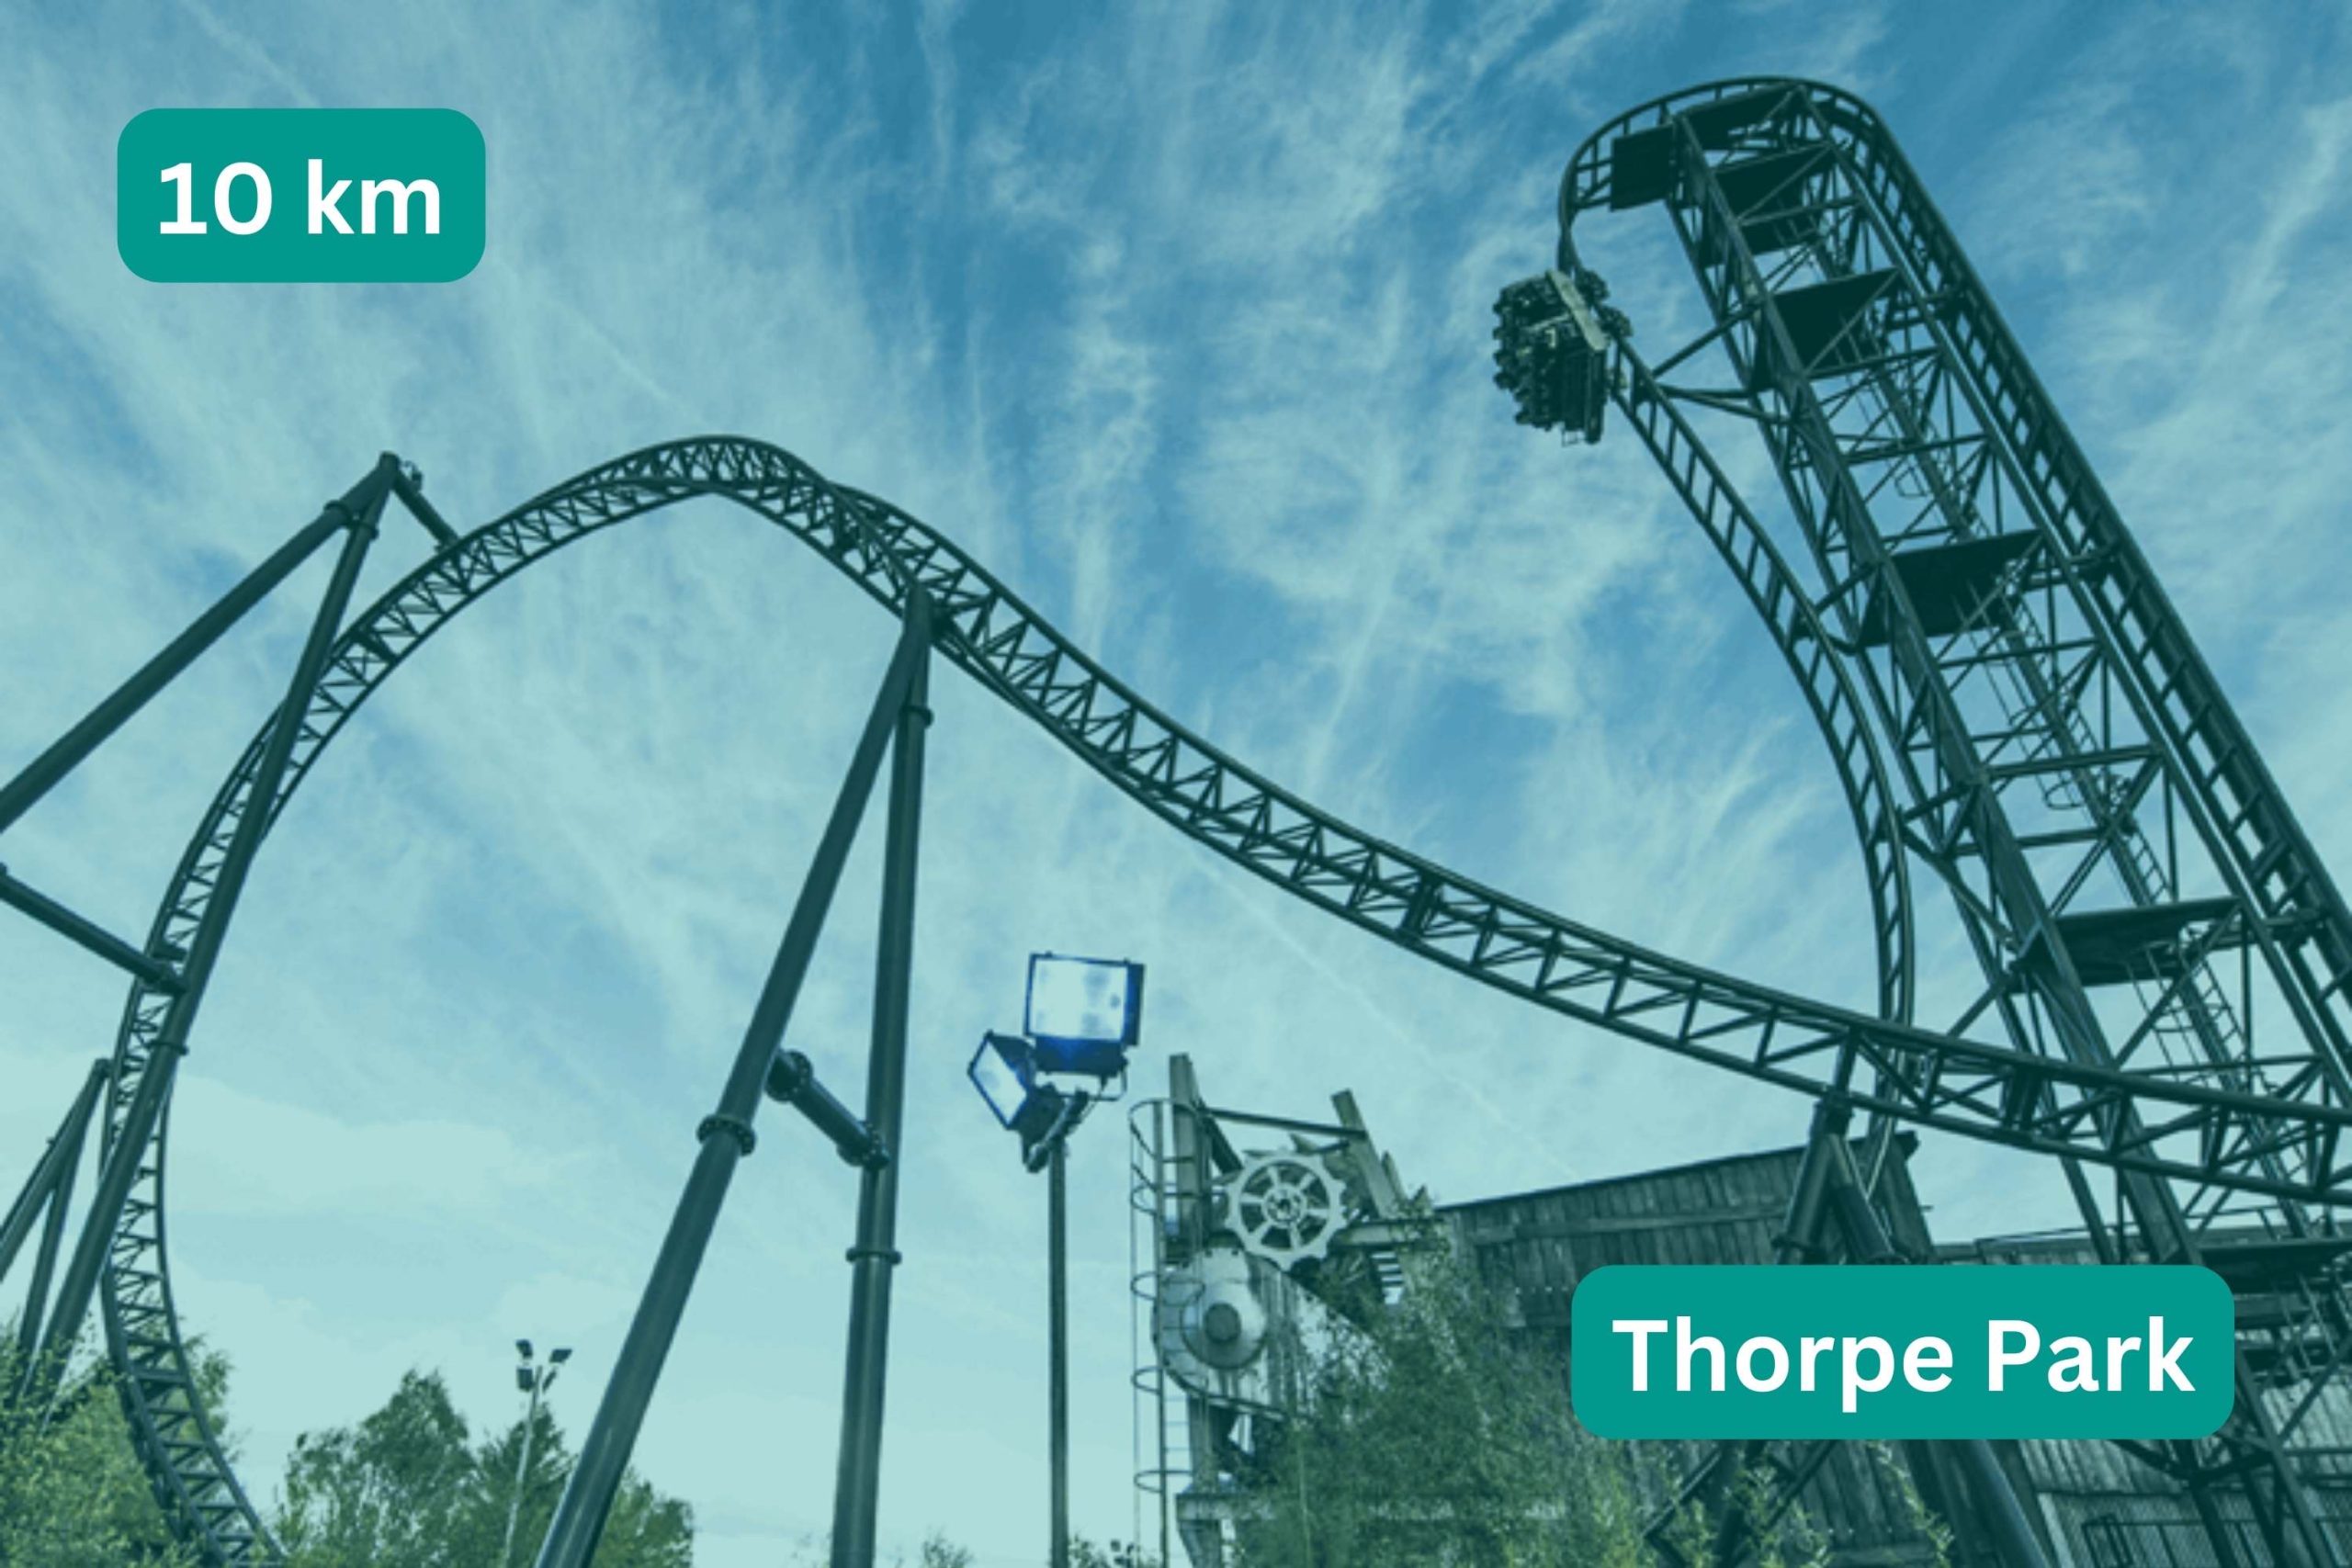 Rollercoaster in Thorpe Park. Title text 10km, Thorpe Park